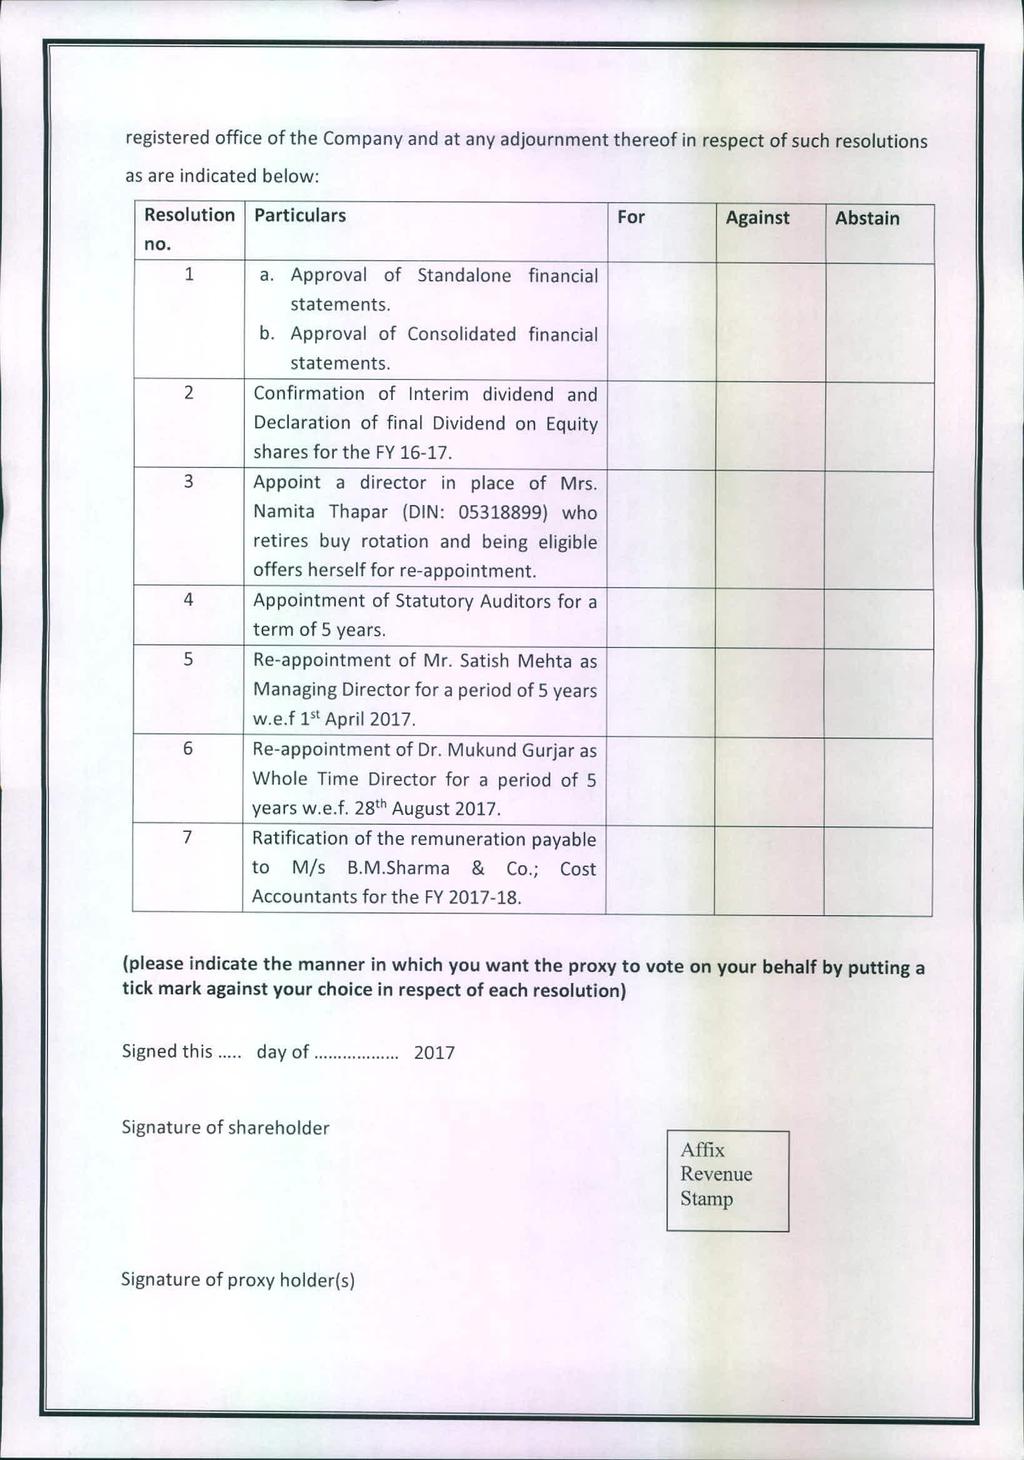 registered office of the Company and at any adjournment thereof in respect of such resolutions as are indicated below: Resolution Particulars For Against Abstain no. 1 a.